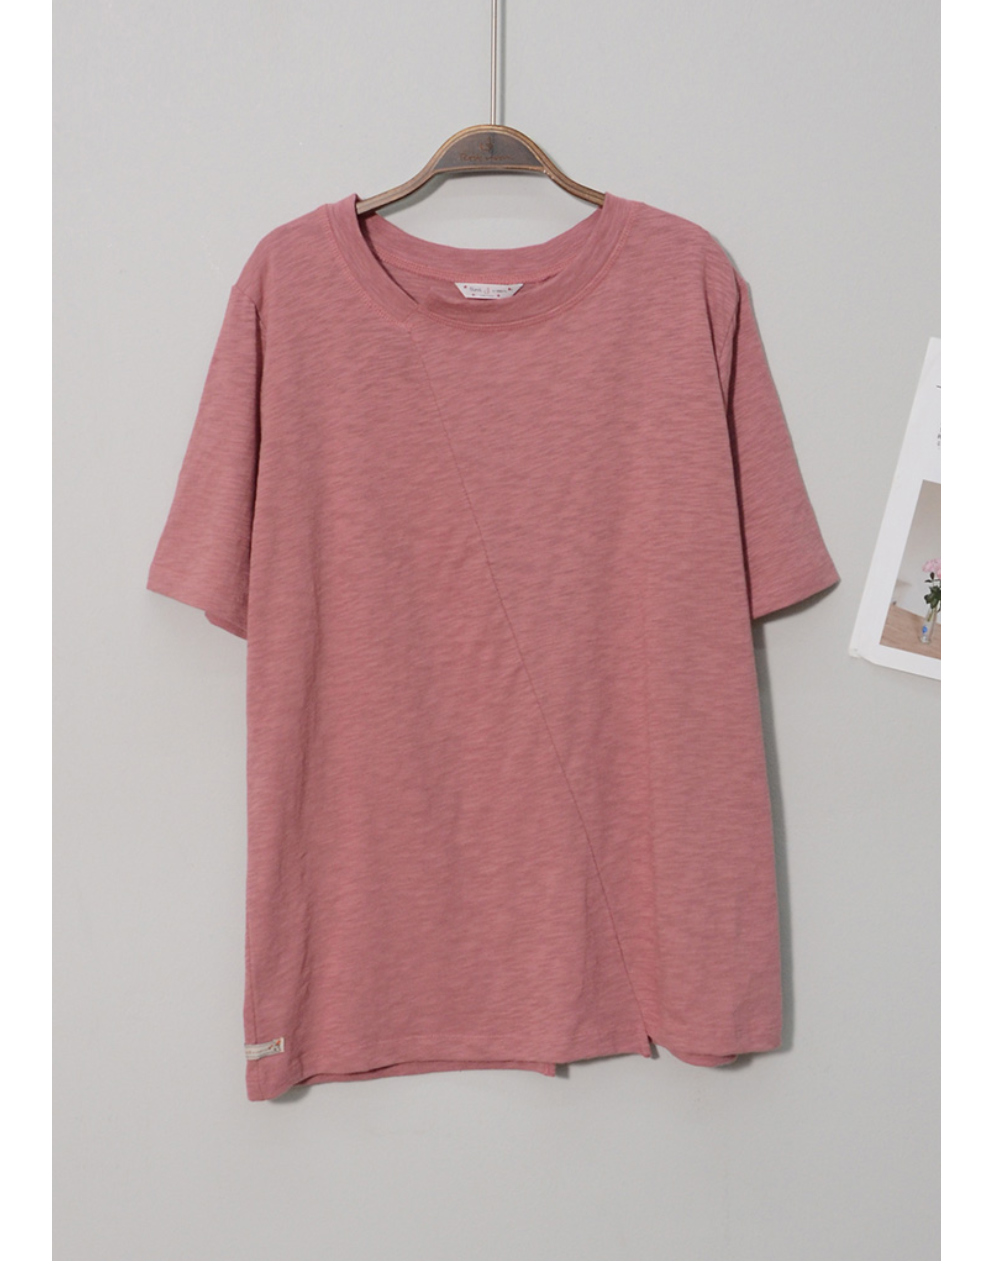 short sleeved tee coral color image-S1L43